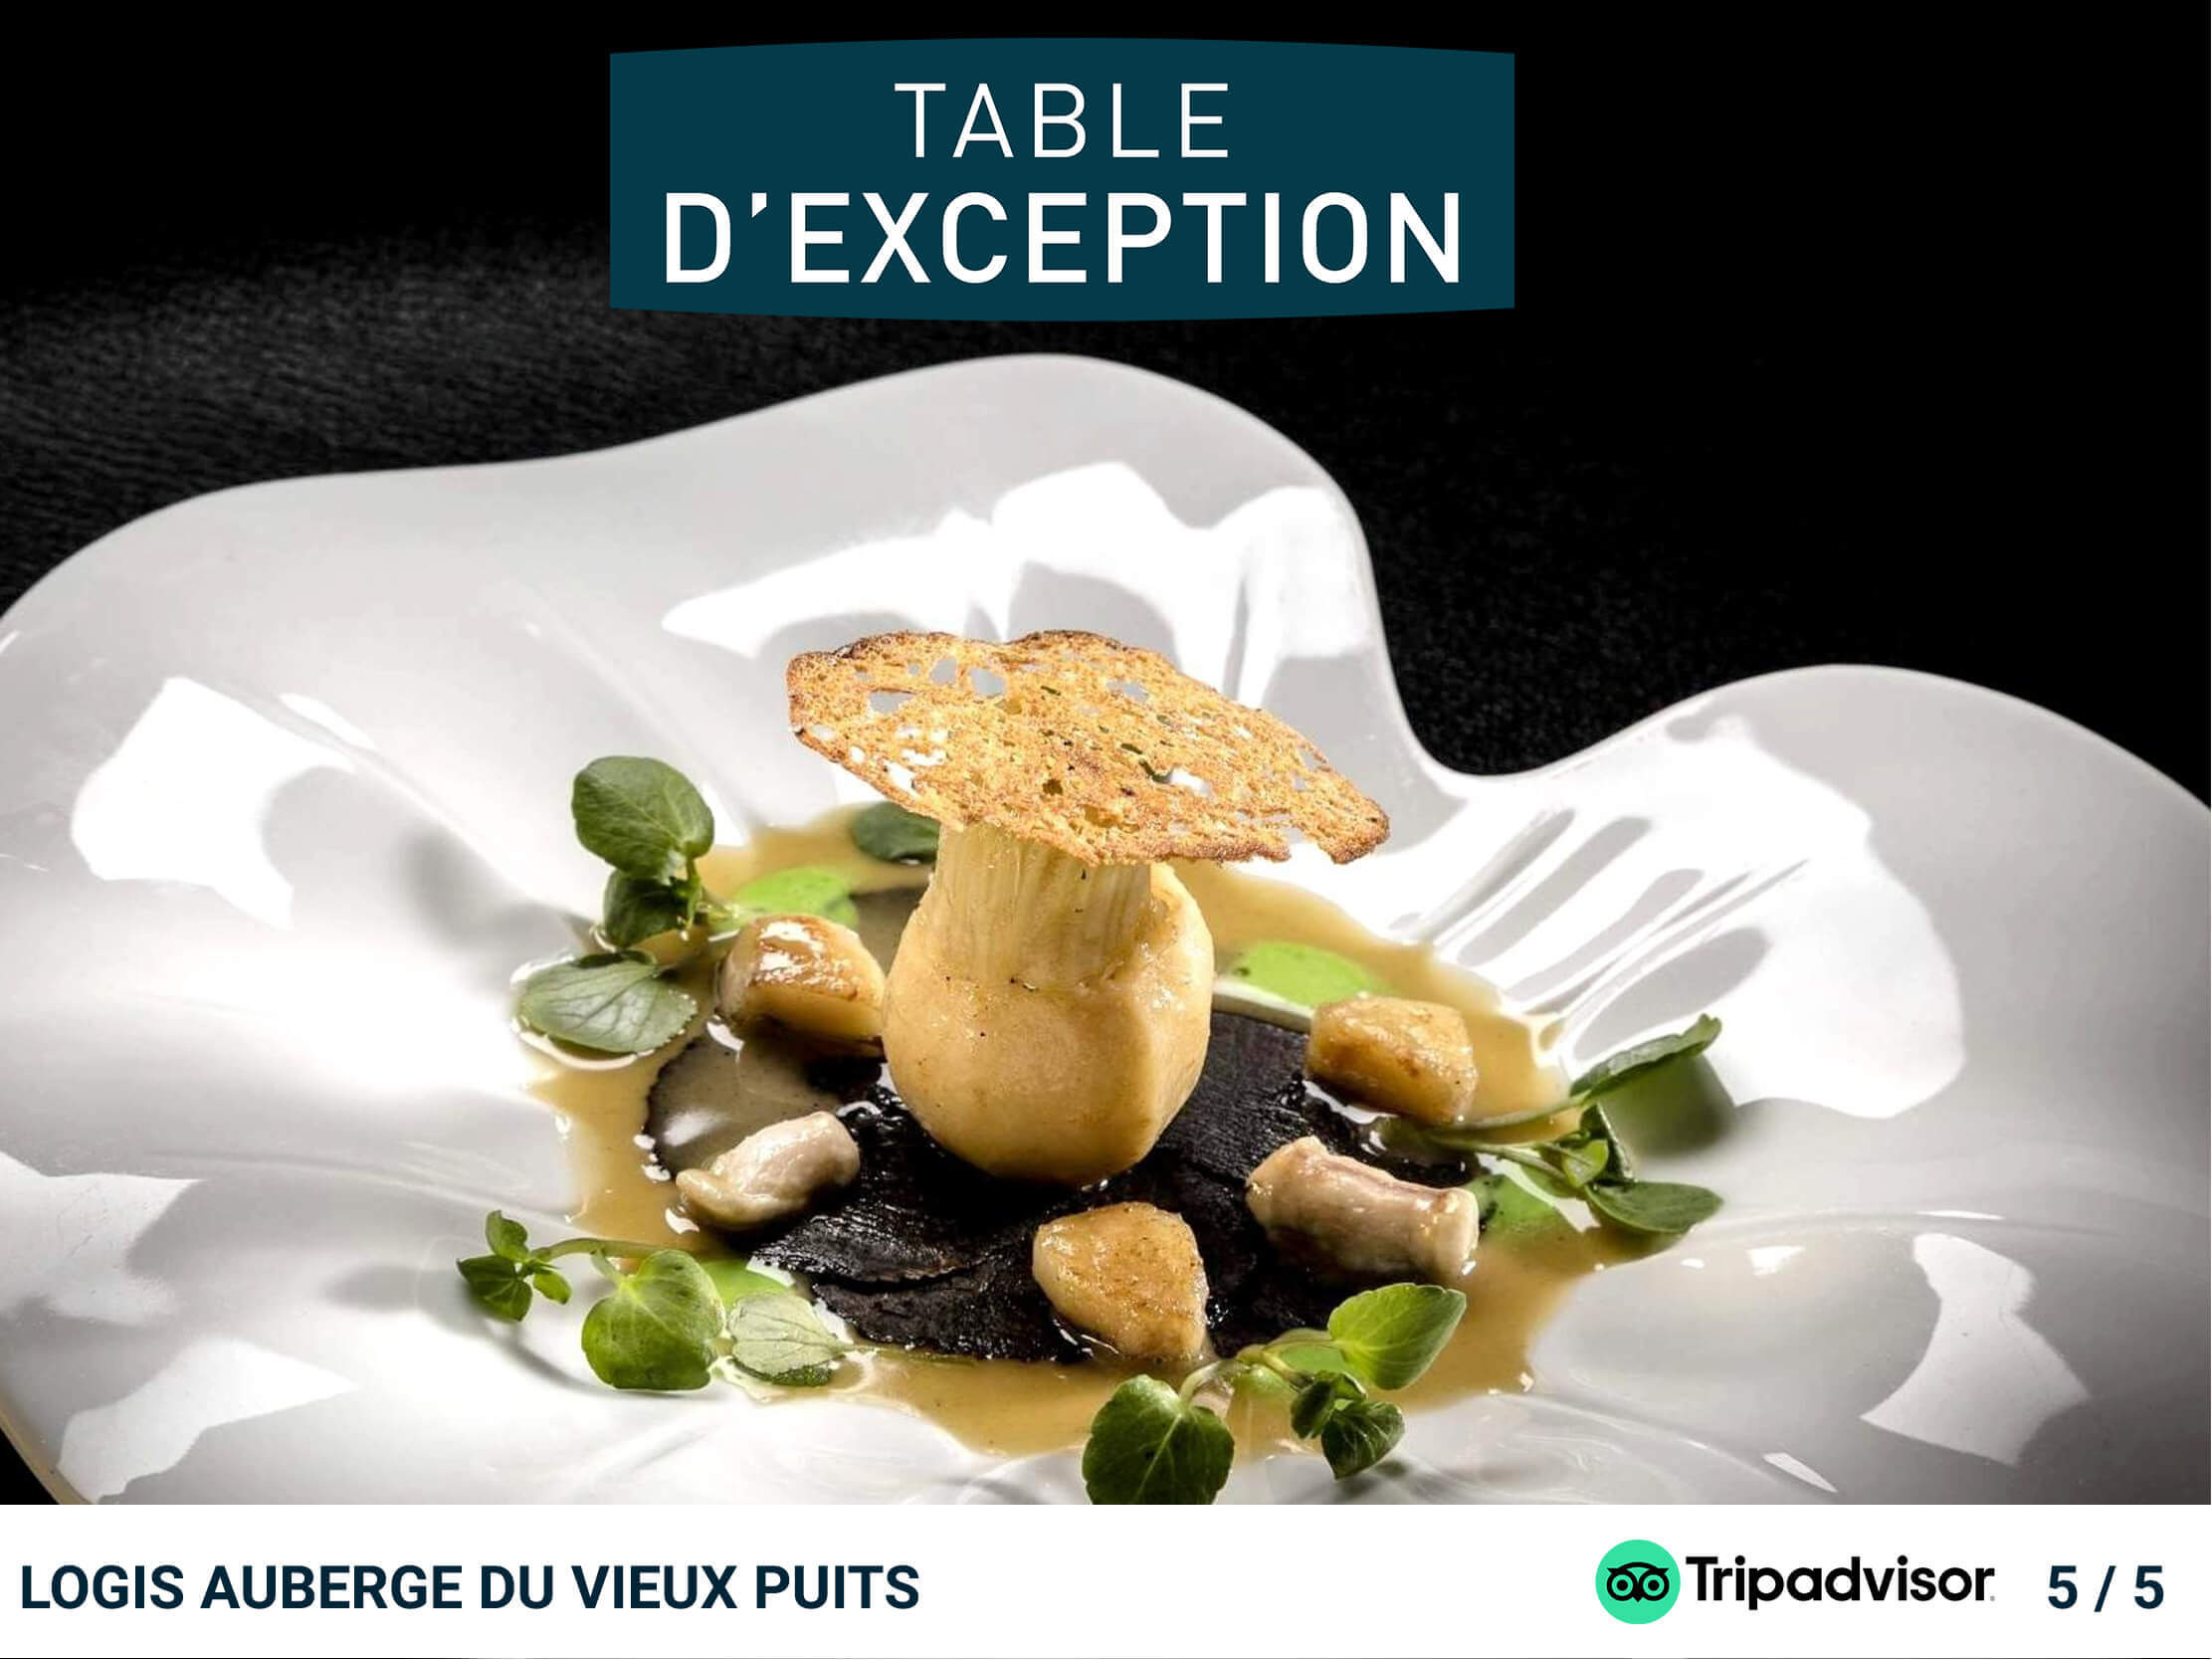 Table d'Exception:  A UNIQUE EXPERIENCE AT THE RESTAURANT OF A GREAT CHEF.